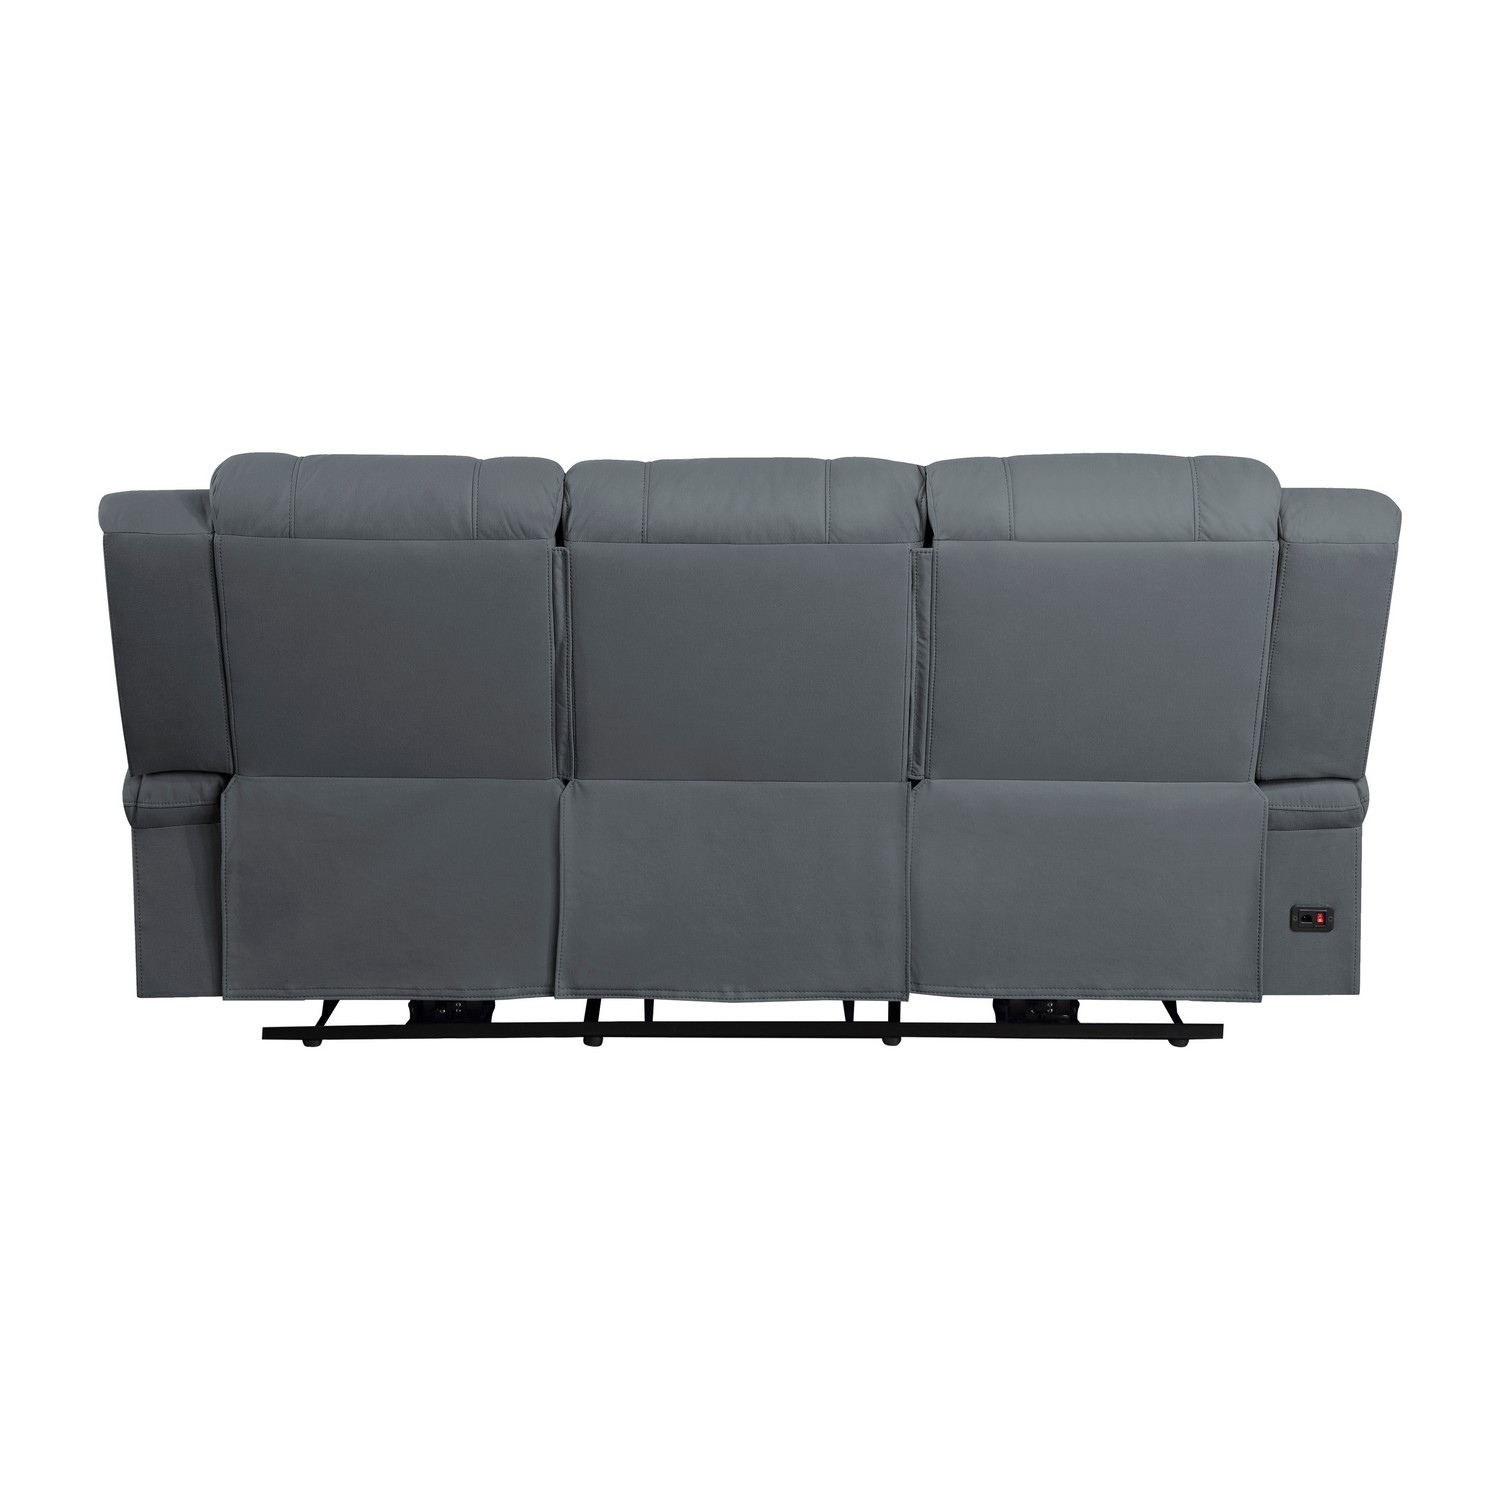 Homelegance Camryn Power Double Reclining Sofa - Graphite blue